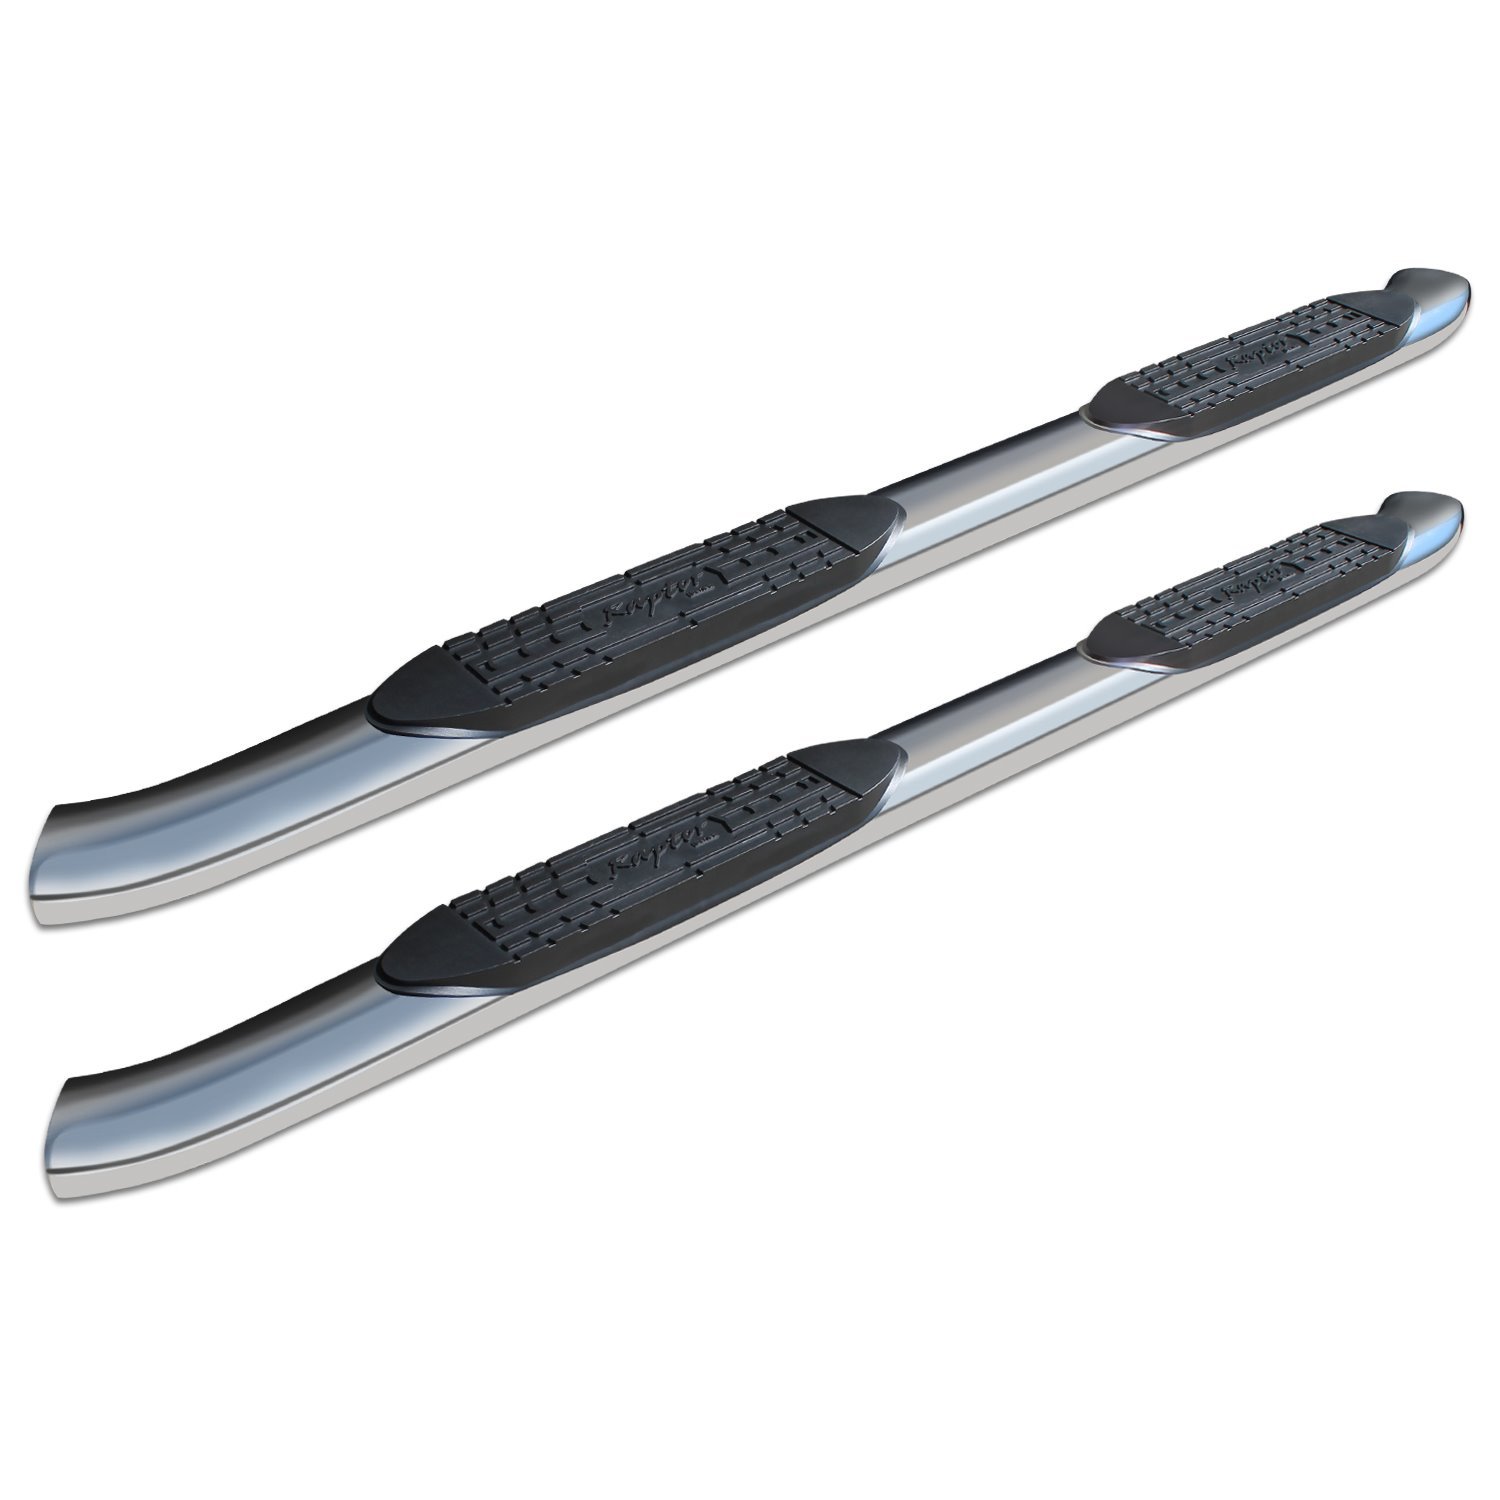 1602-0482 5 in OE Style Curved Oval Steps, Polished Steel, Fits Select Dodge Ram 1500 New Body Style Quad/Extended Cab